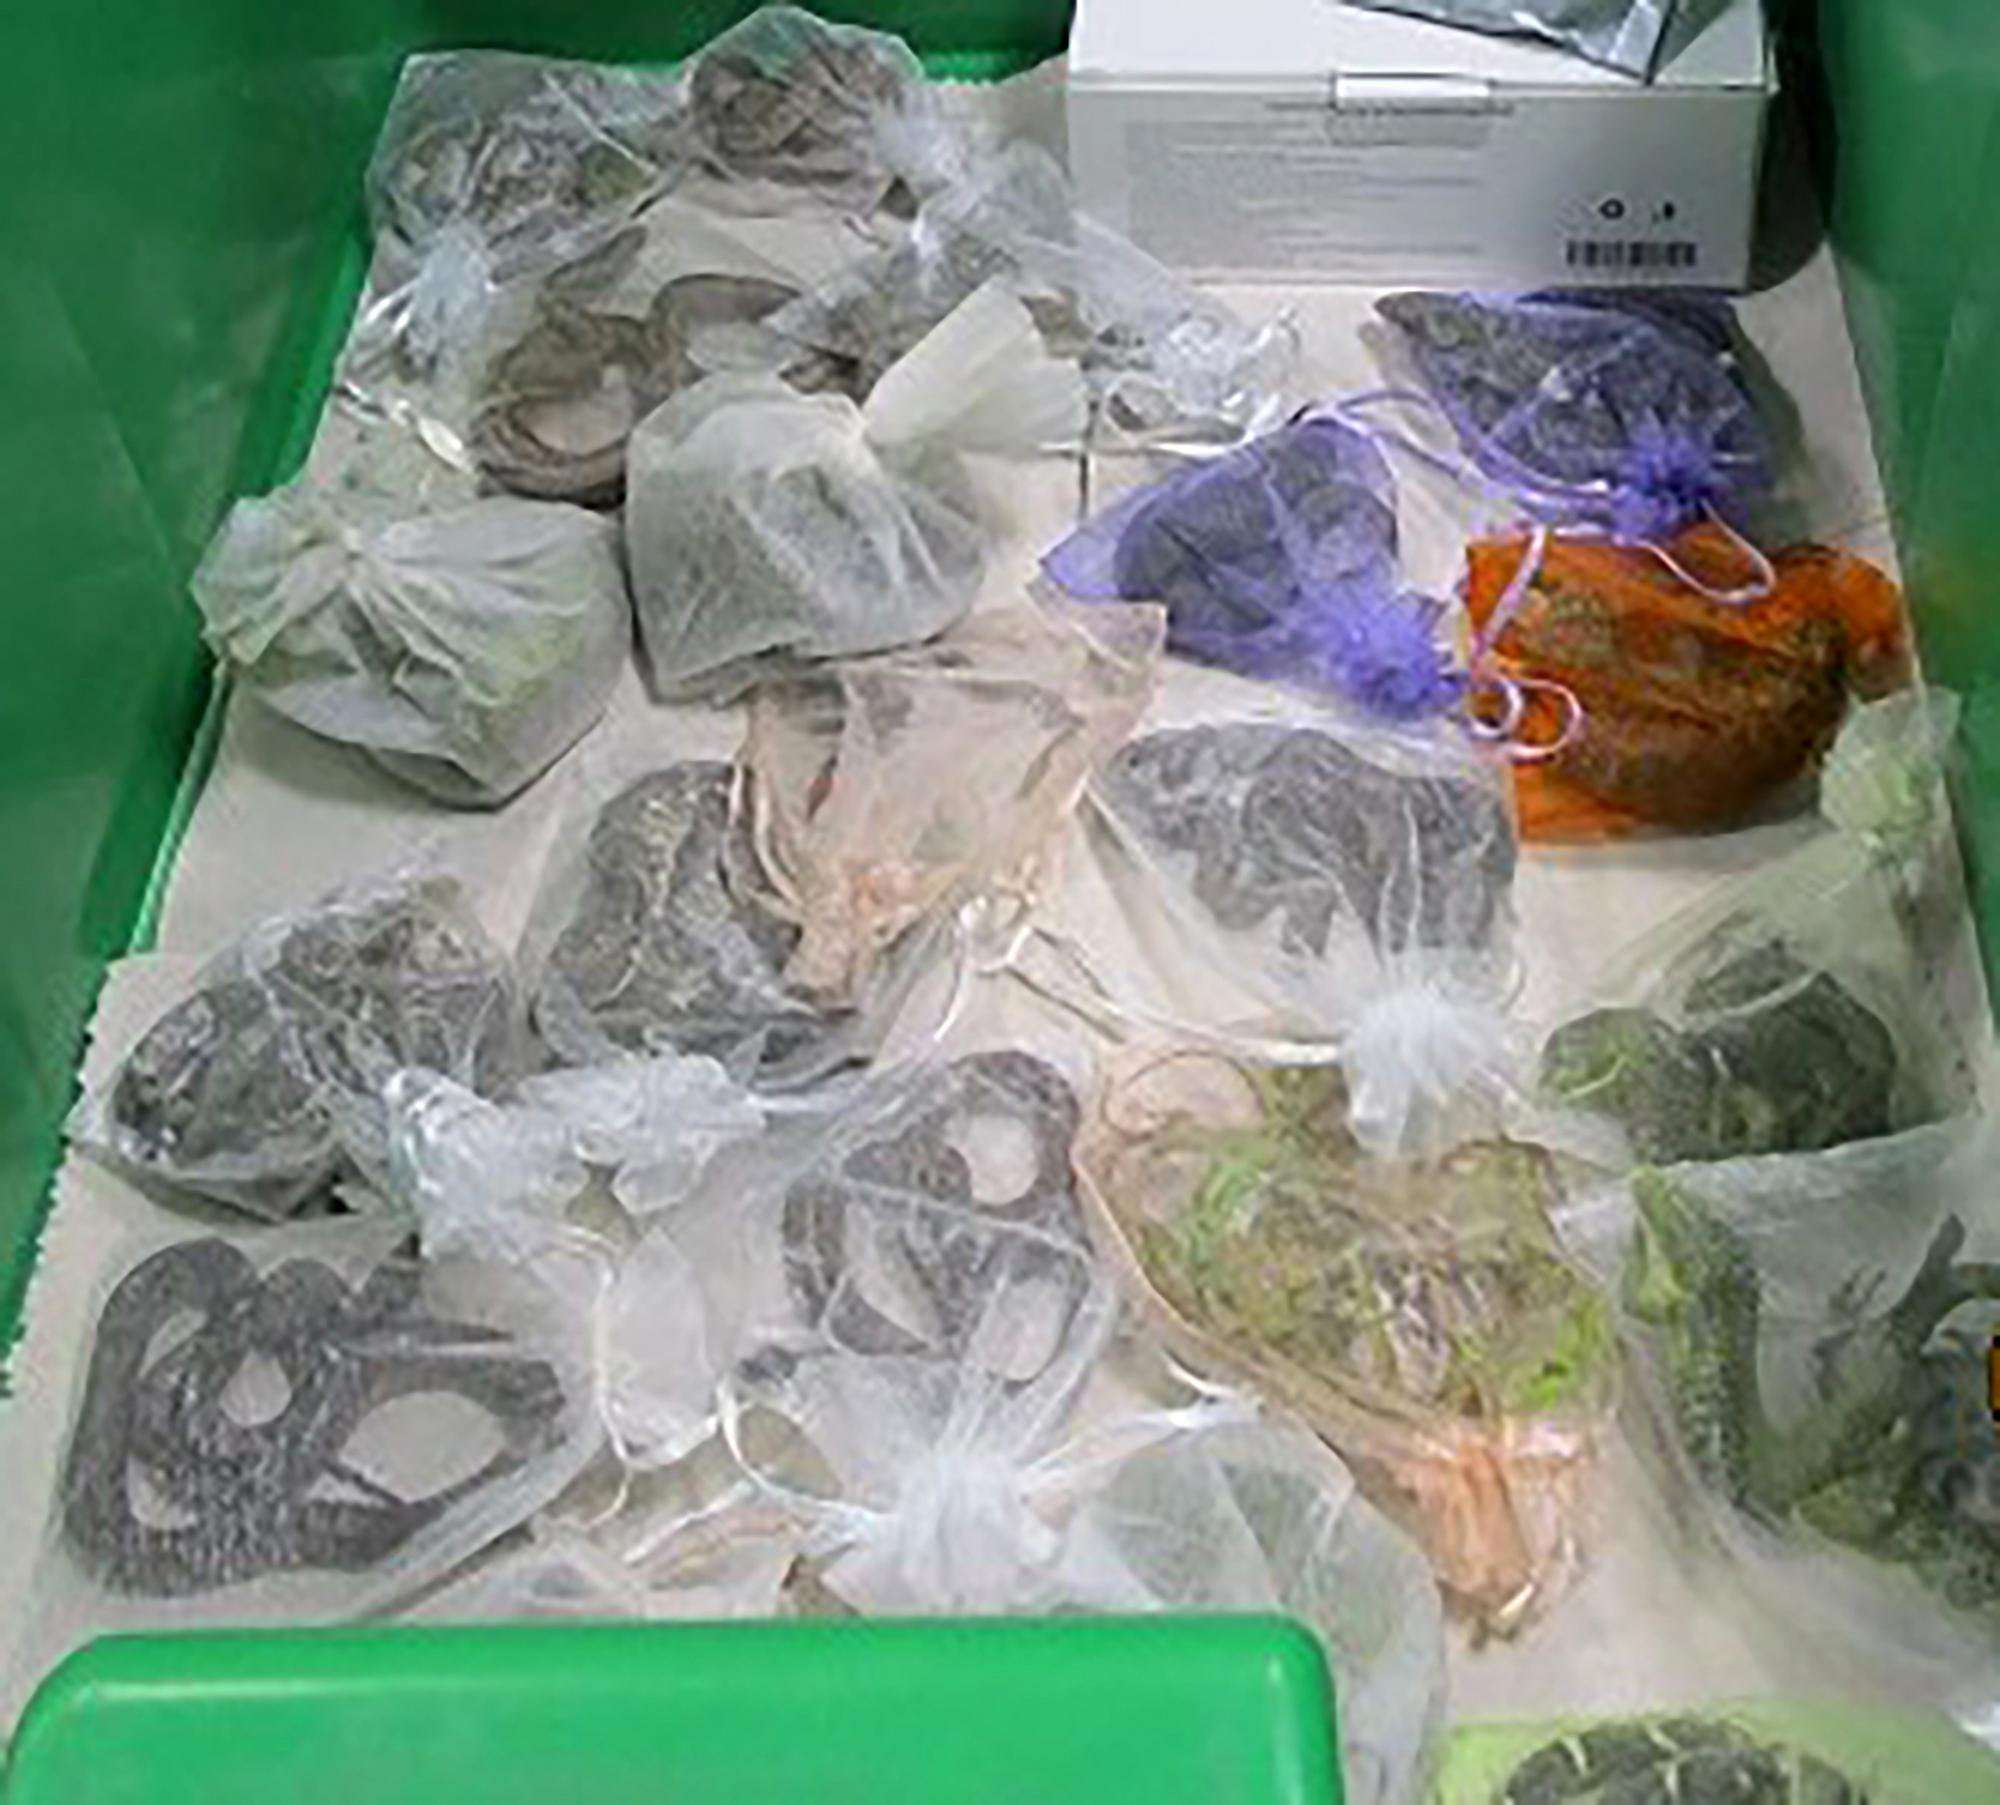 image for Border authorities find 52 reptiles hidden in man’s clothing